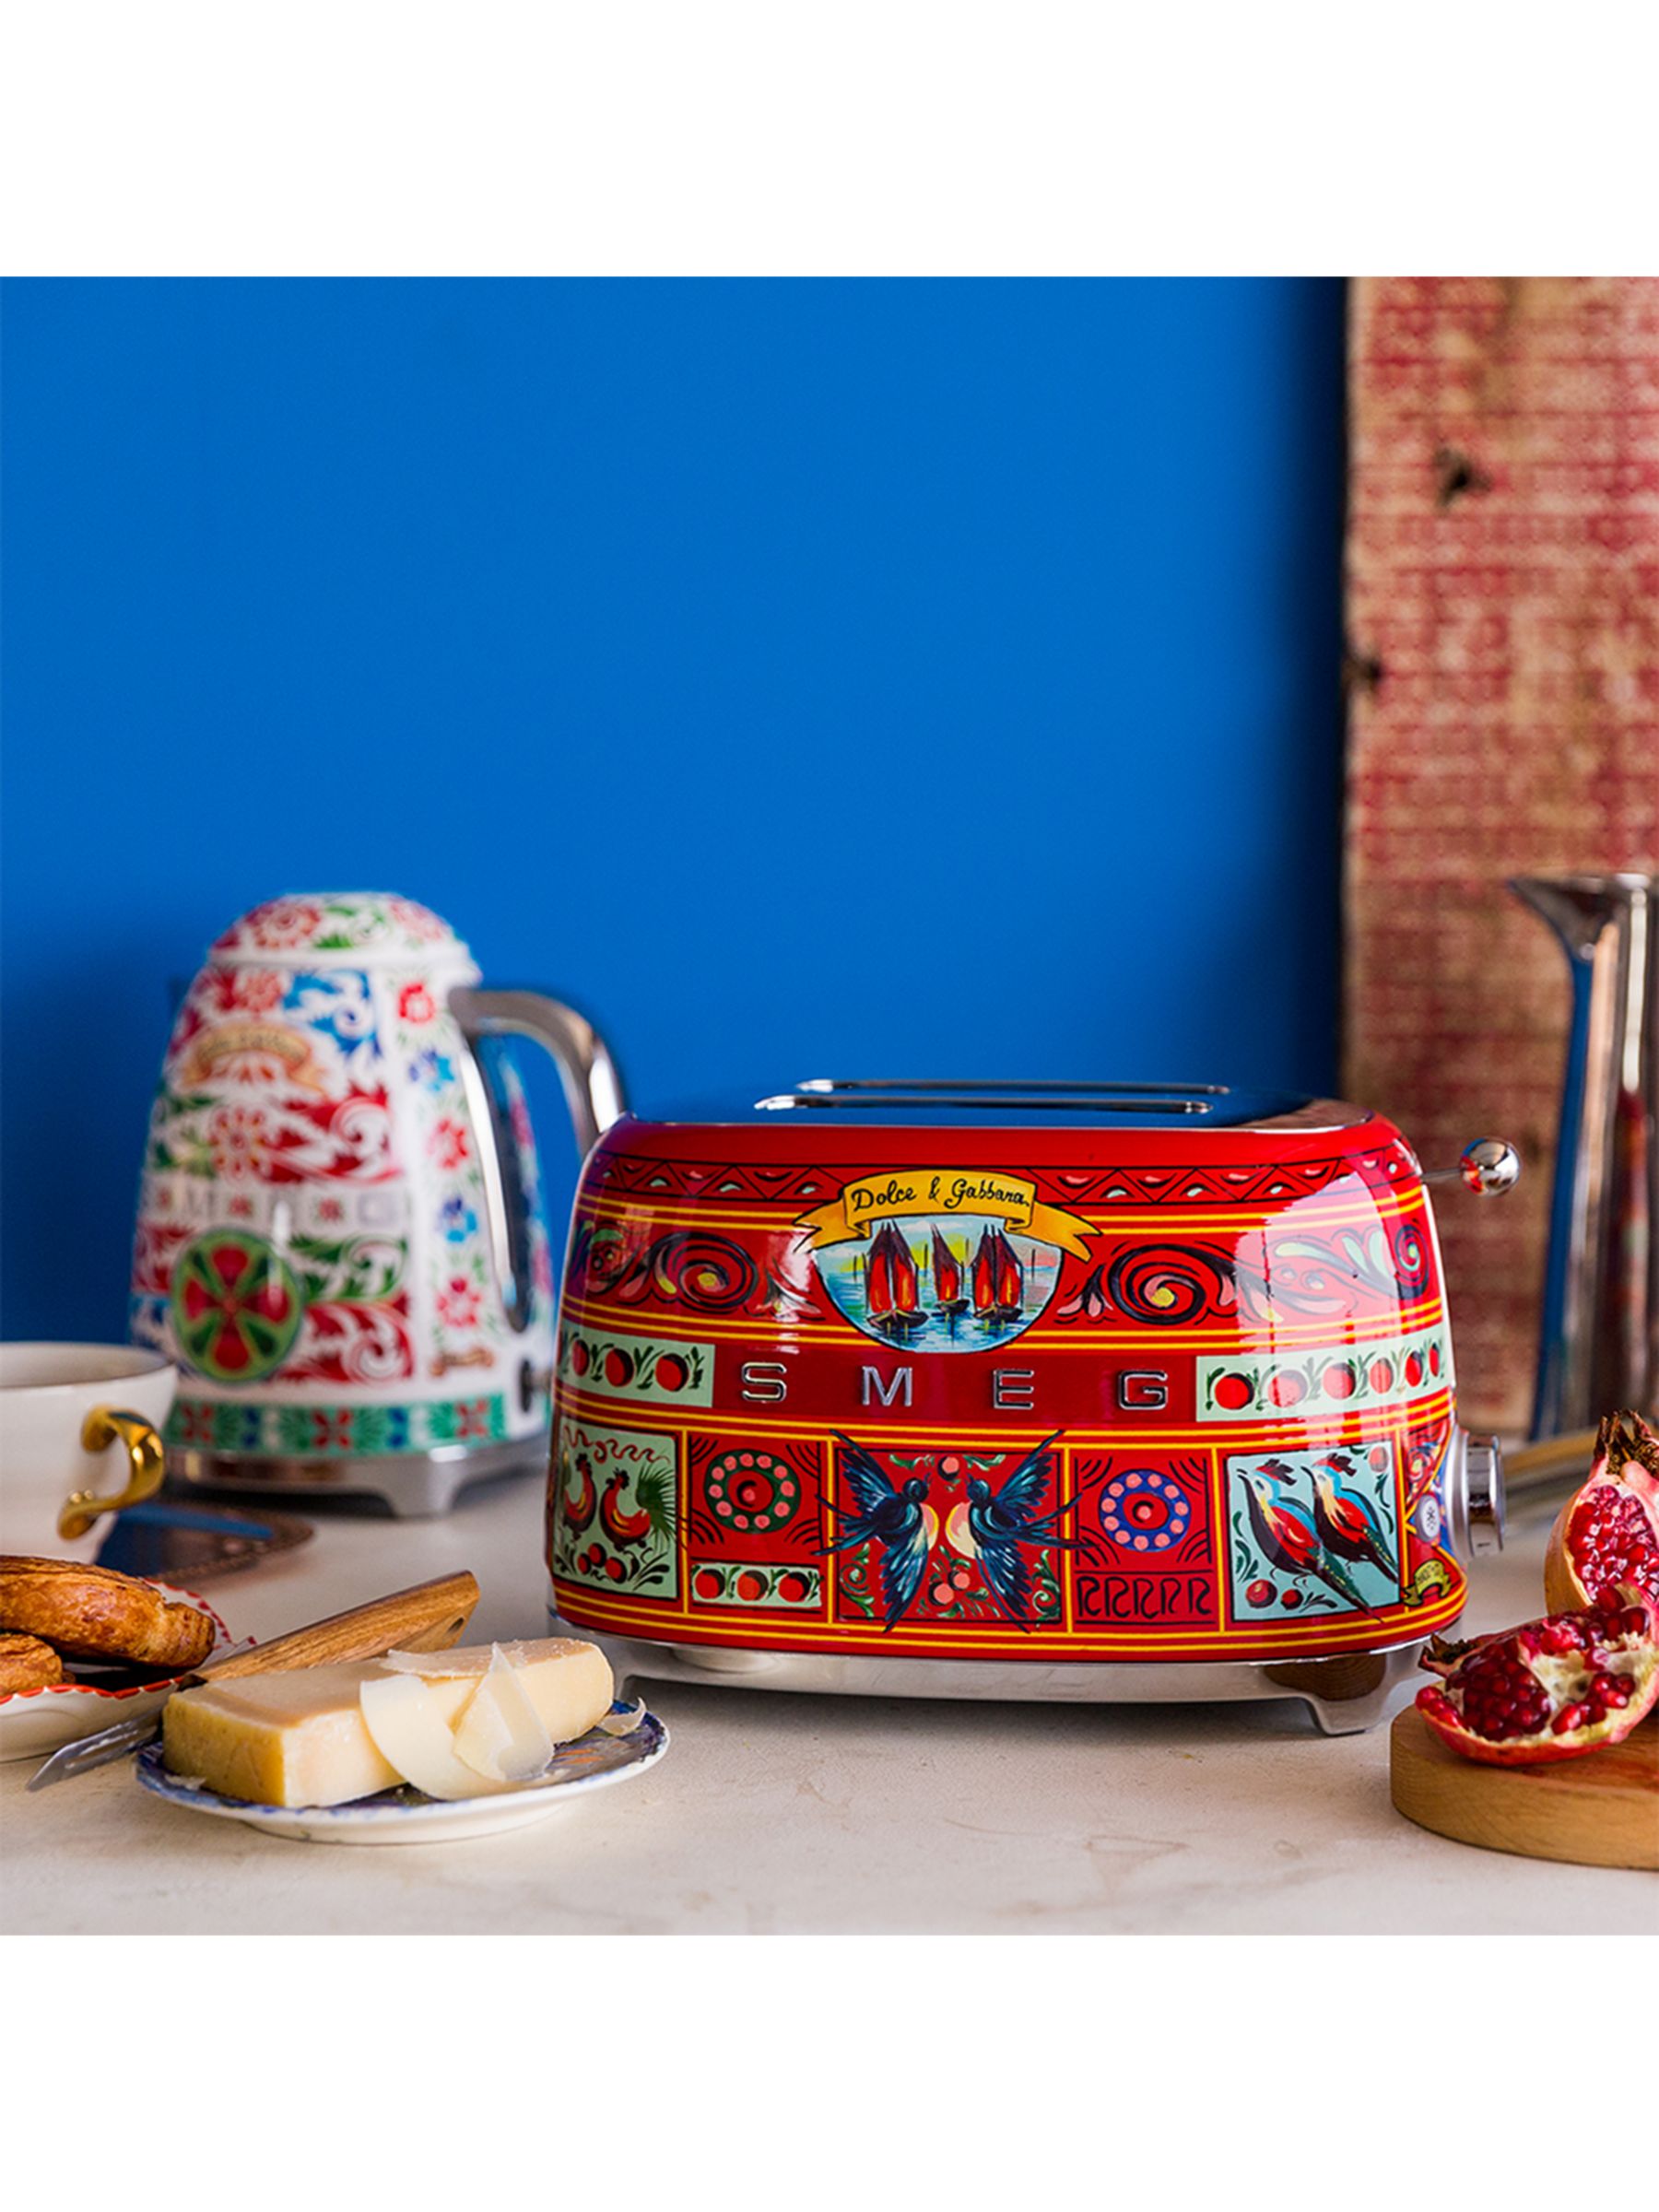 dolce and gabbana smeg kettle and toaster